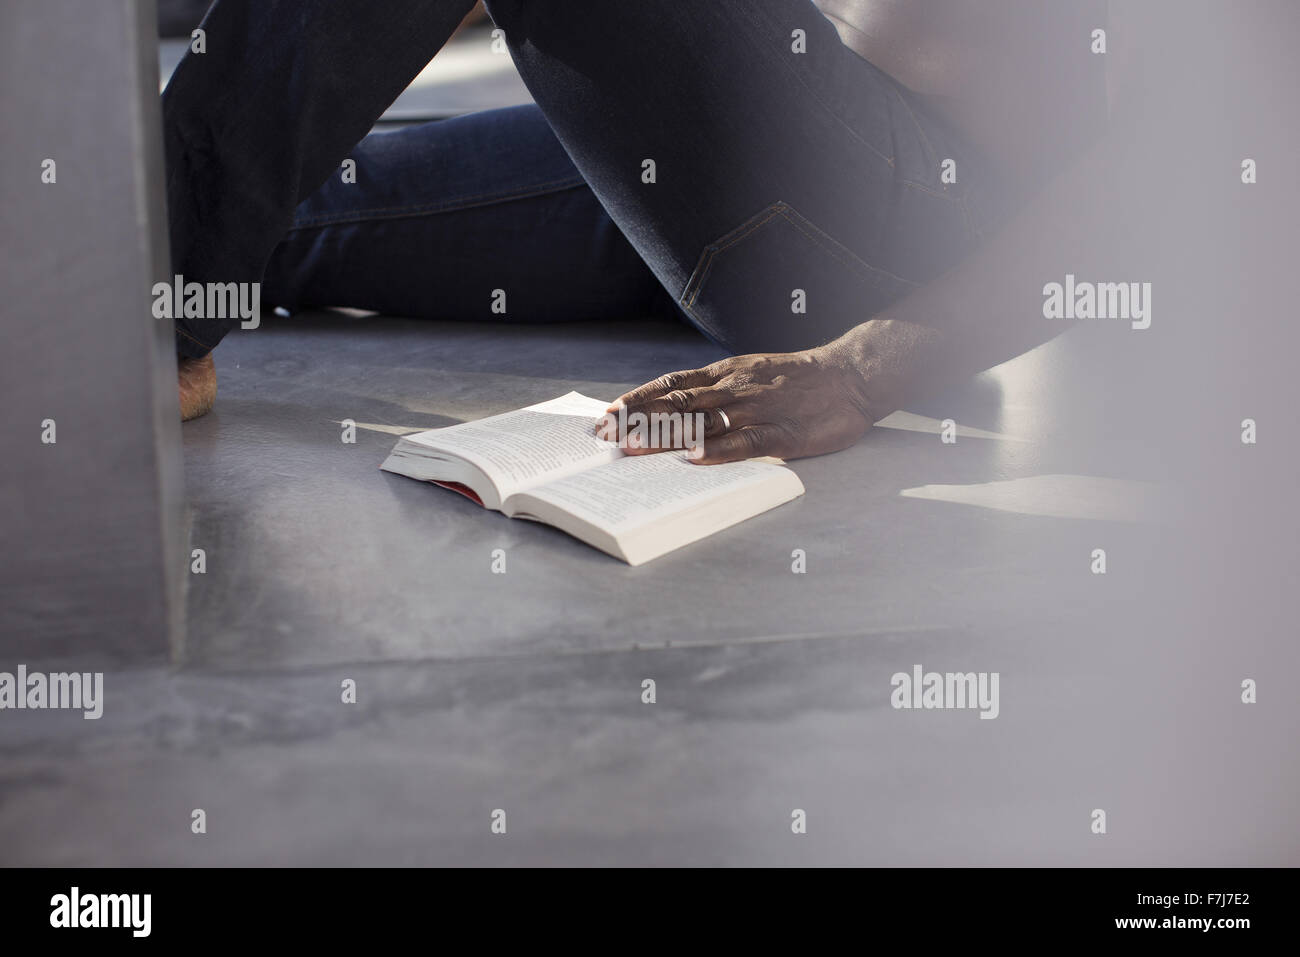 Man reading book on floor, cropped Stock Photo